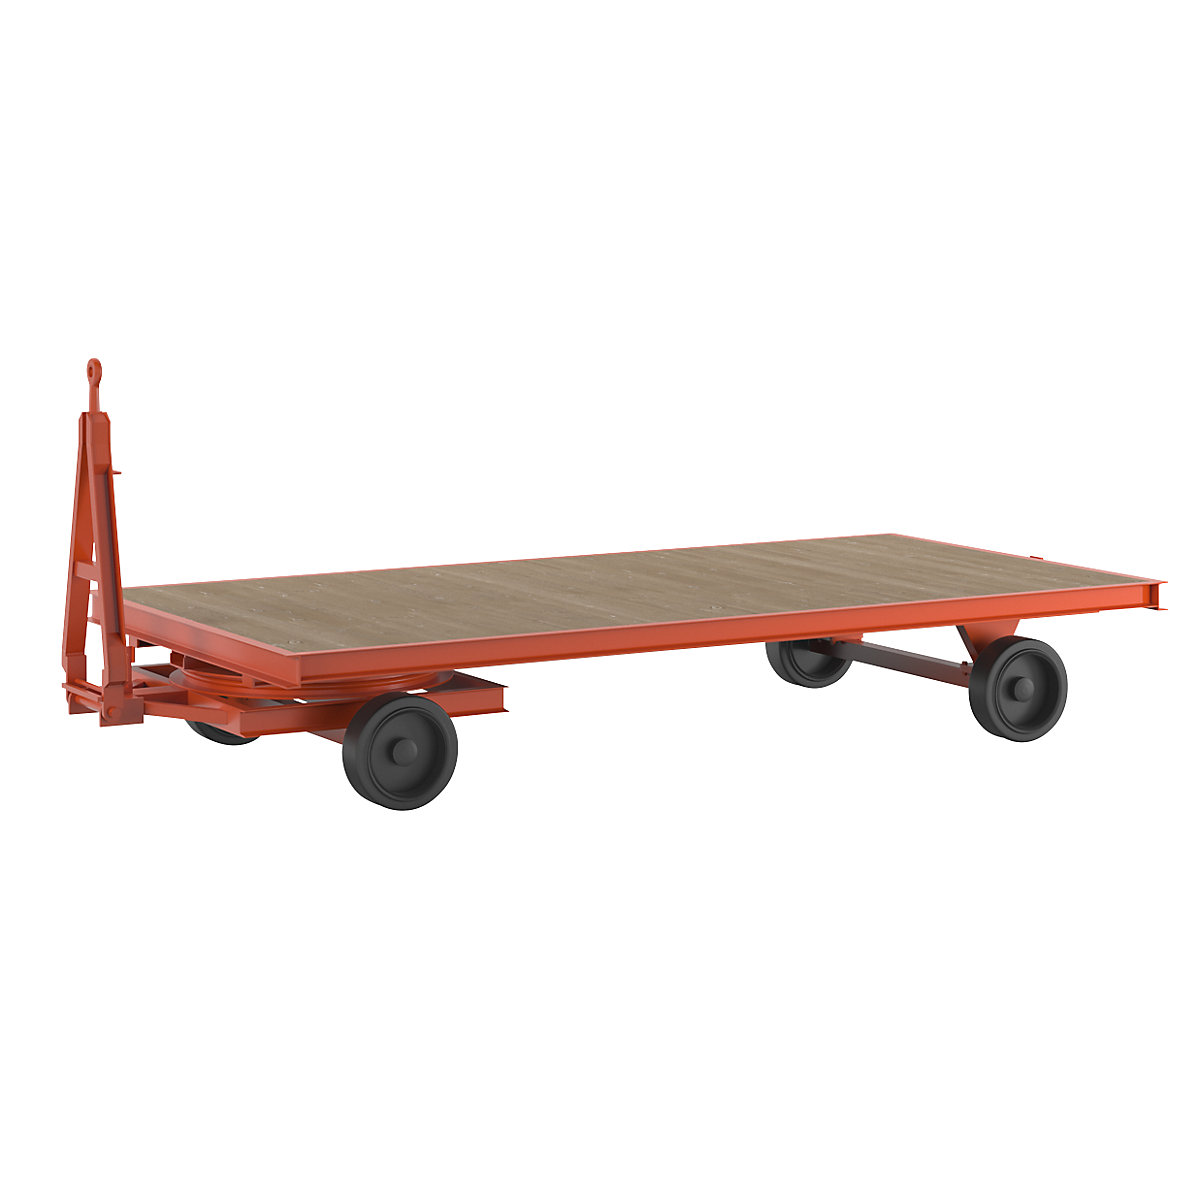 Trailer, 2-wheel turntable steering, max. load 8 t, platform 4.0 x 2.0 m, solid rubber tyres-1